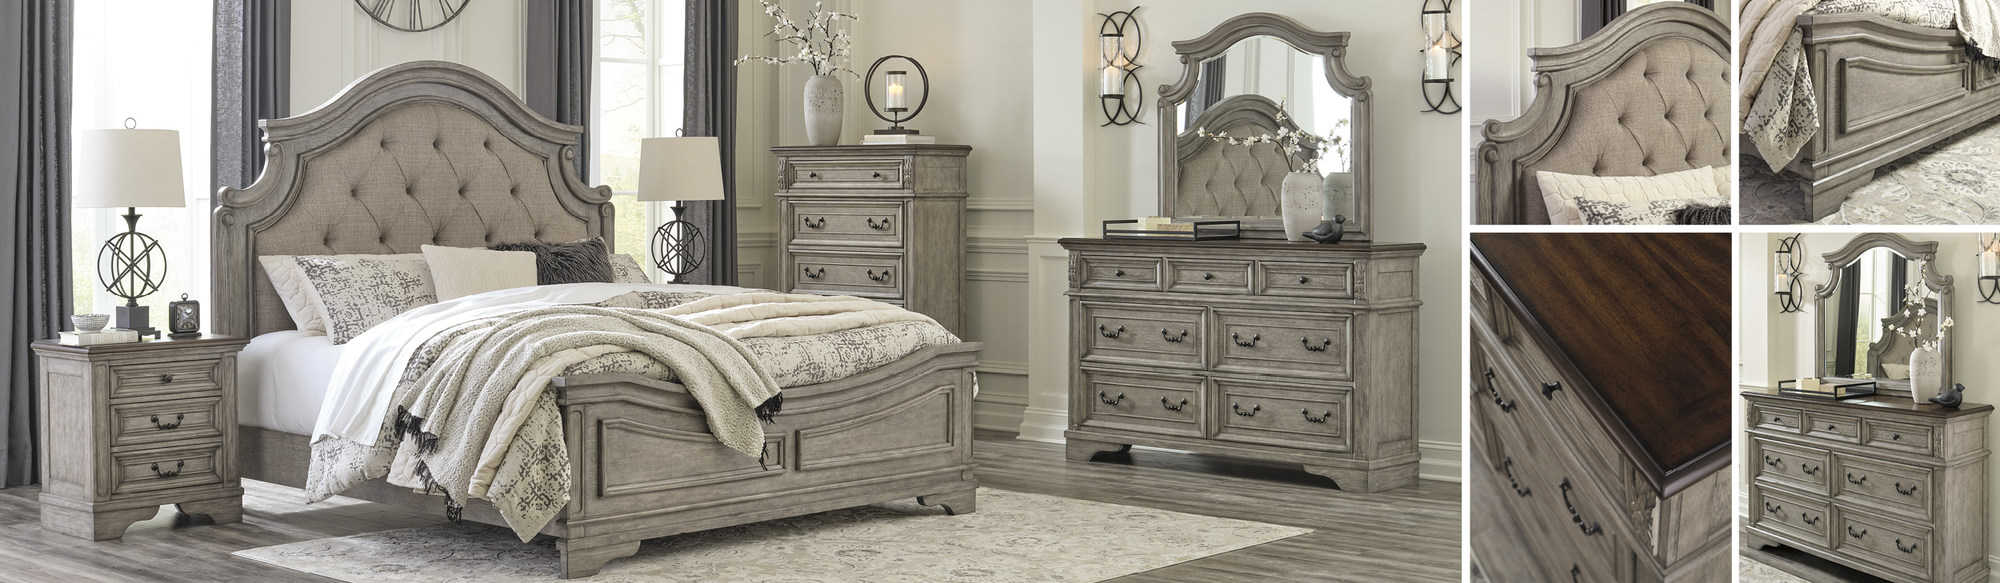 Shop the Lodenbay Bedroom Suite at JR Furniture Store in Fayetteville, NC 28311